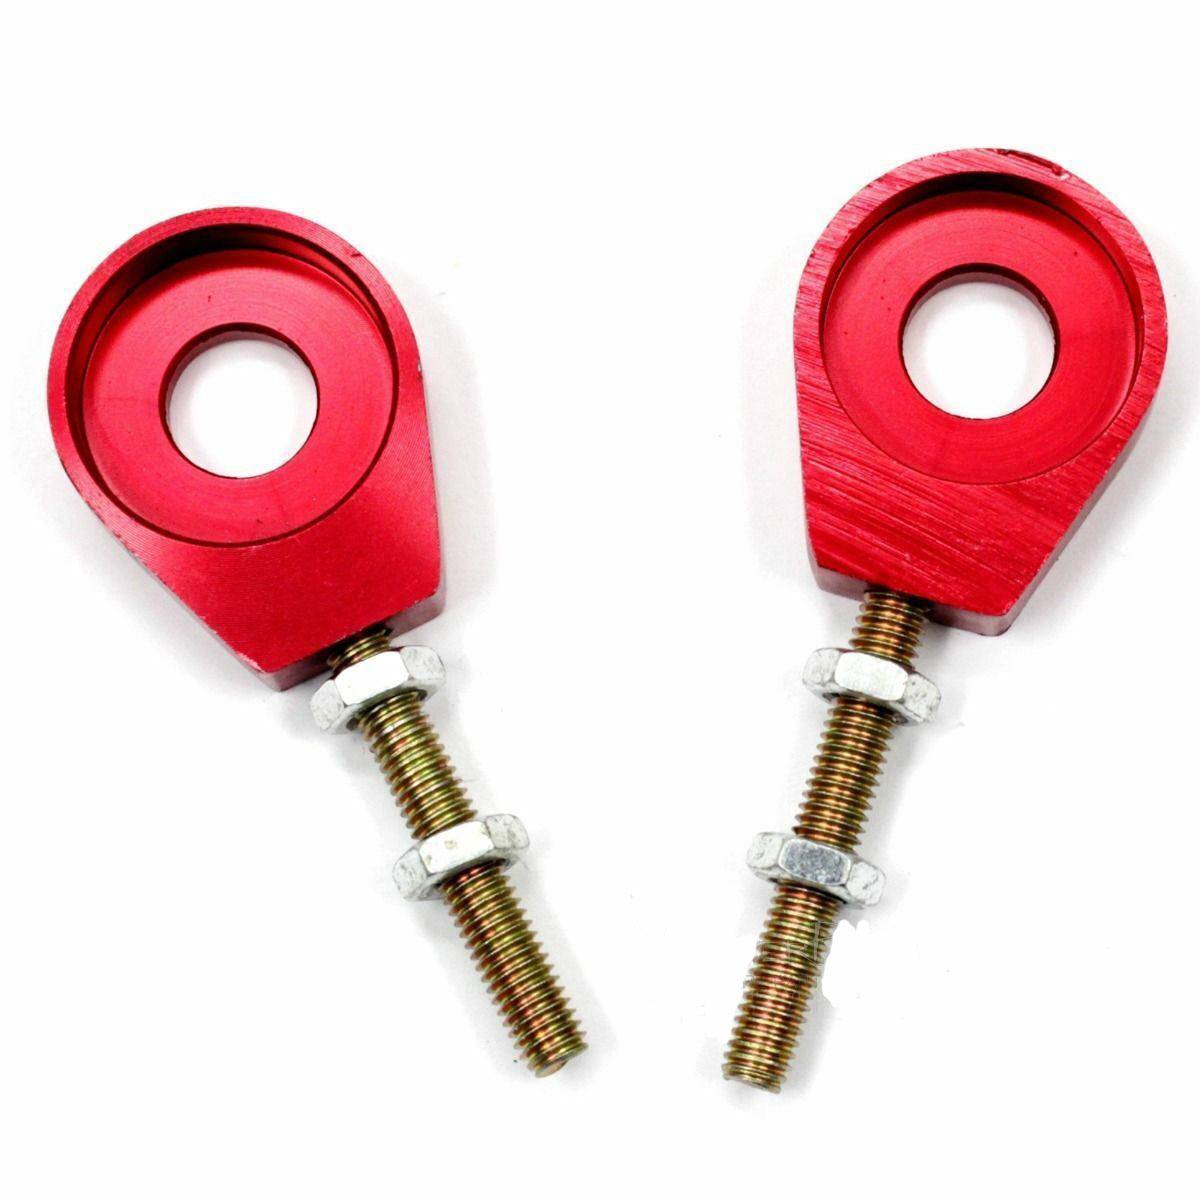 Red 2pc 15mm Chain Tensioner Adjusters Fit Honda Atomik Thumpstar Bike Scooter - TDRMOTO